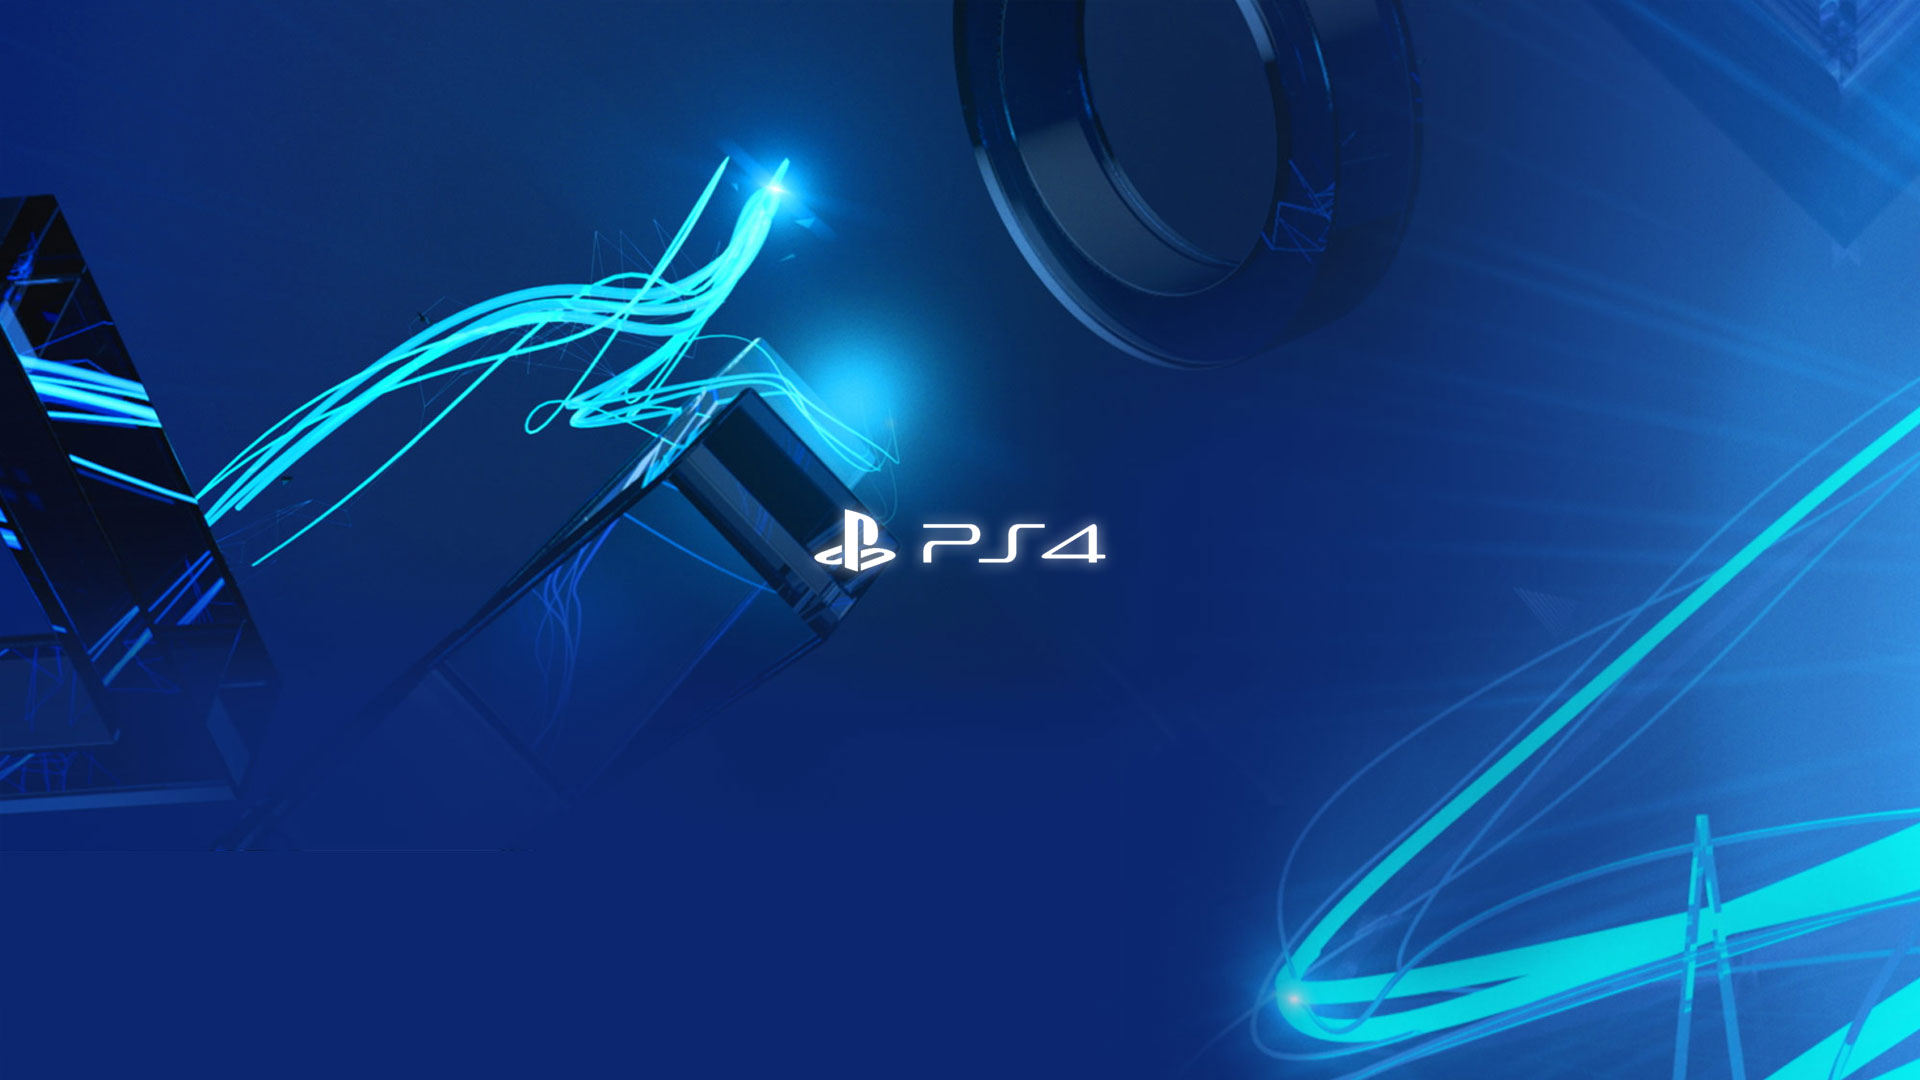 PS4 Wallpapers PlayStation 4 Wallpapers HD 1920x1080